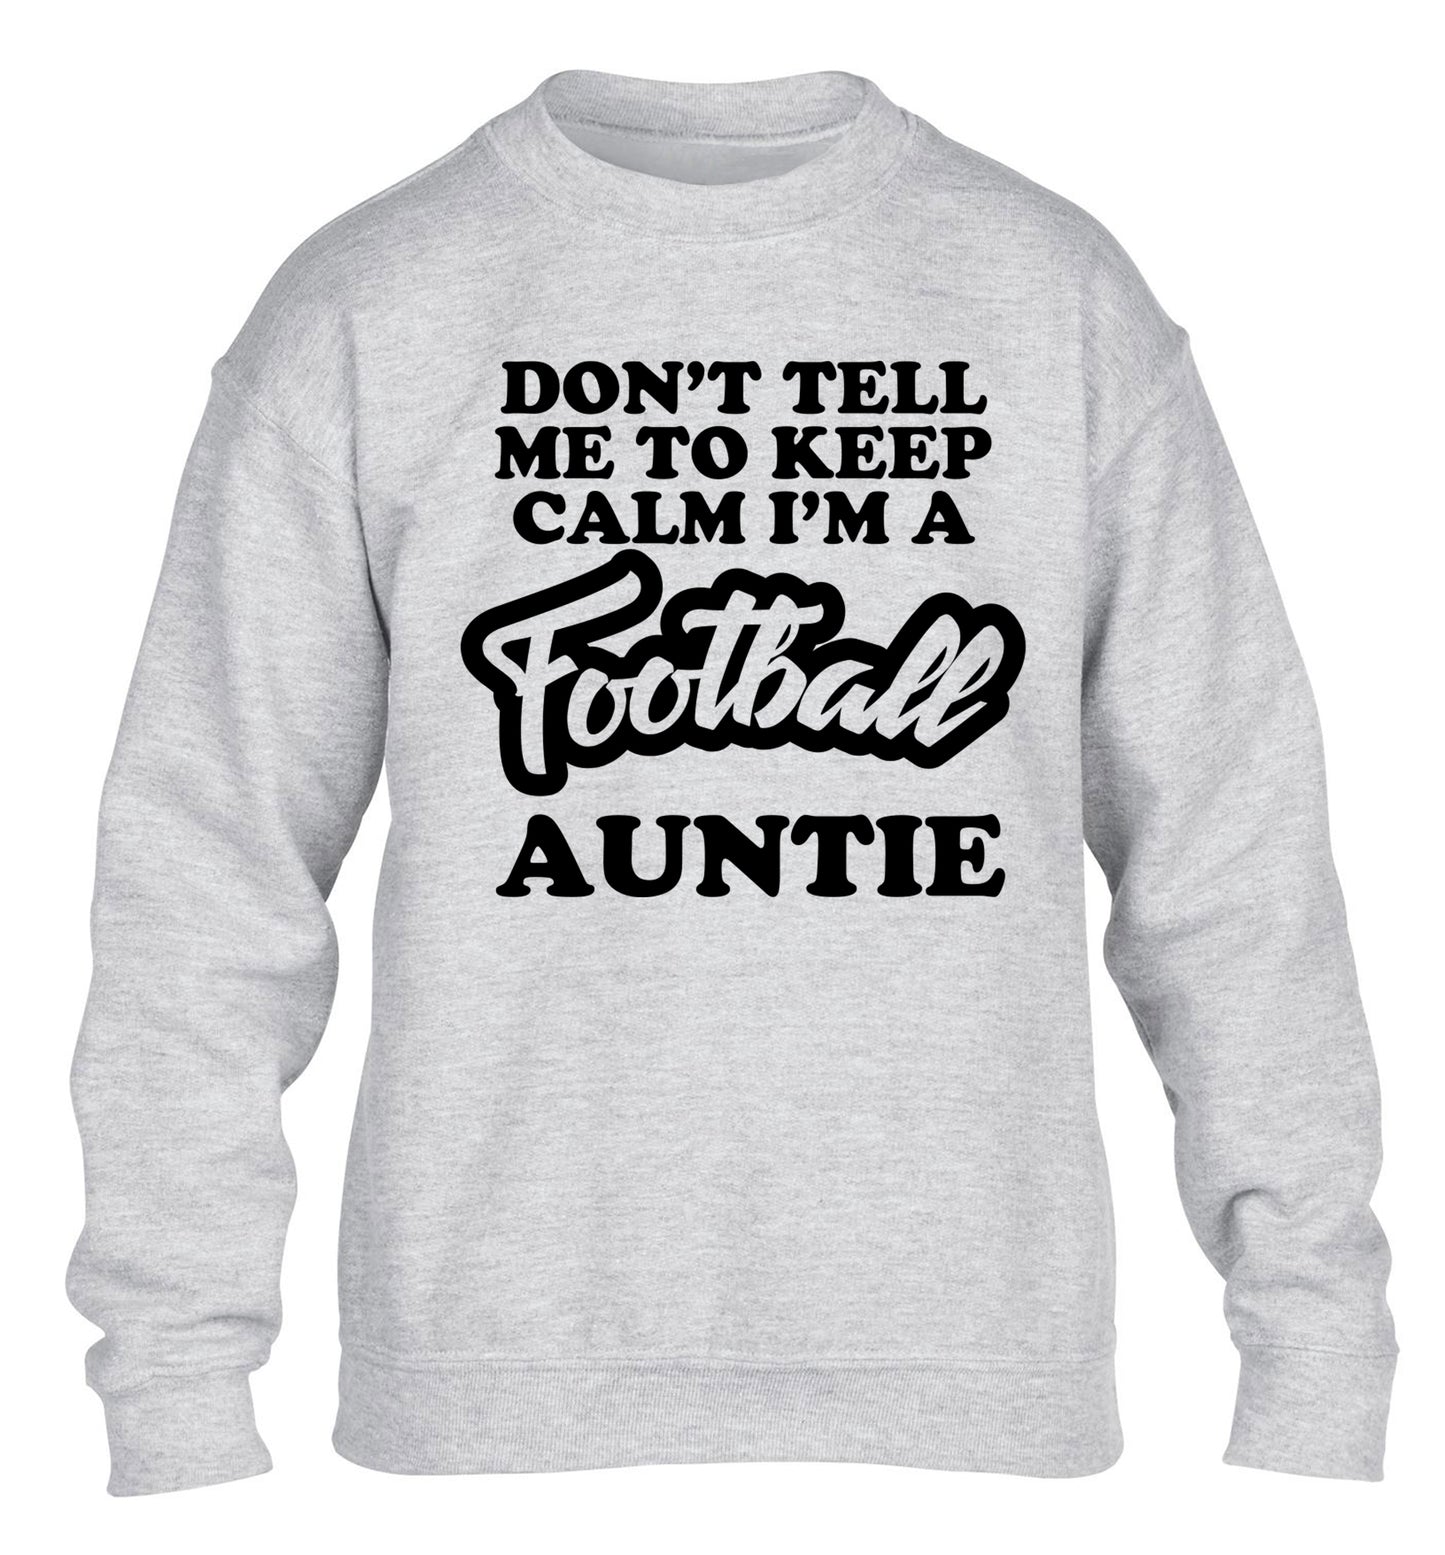 Don't tell me to keep calm I'm a football auntie children's grey sweater 12-14 Years